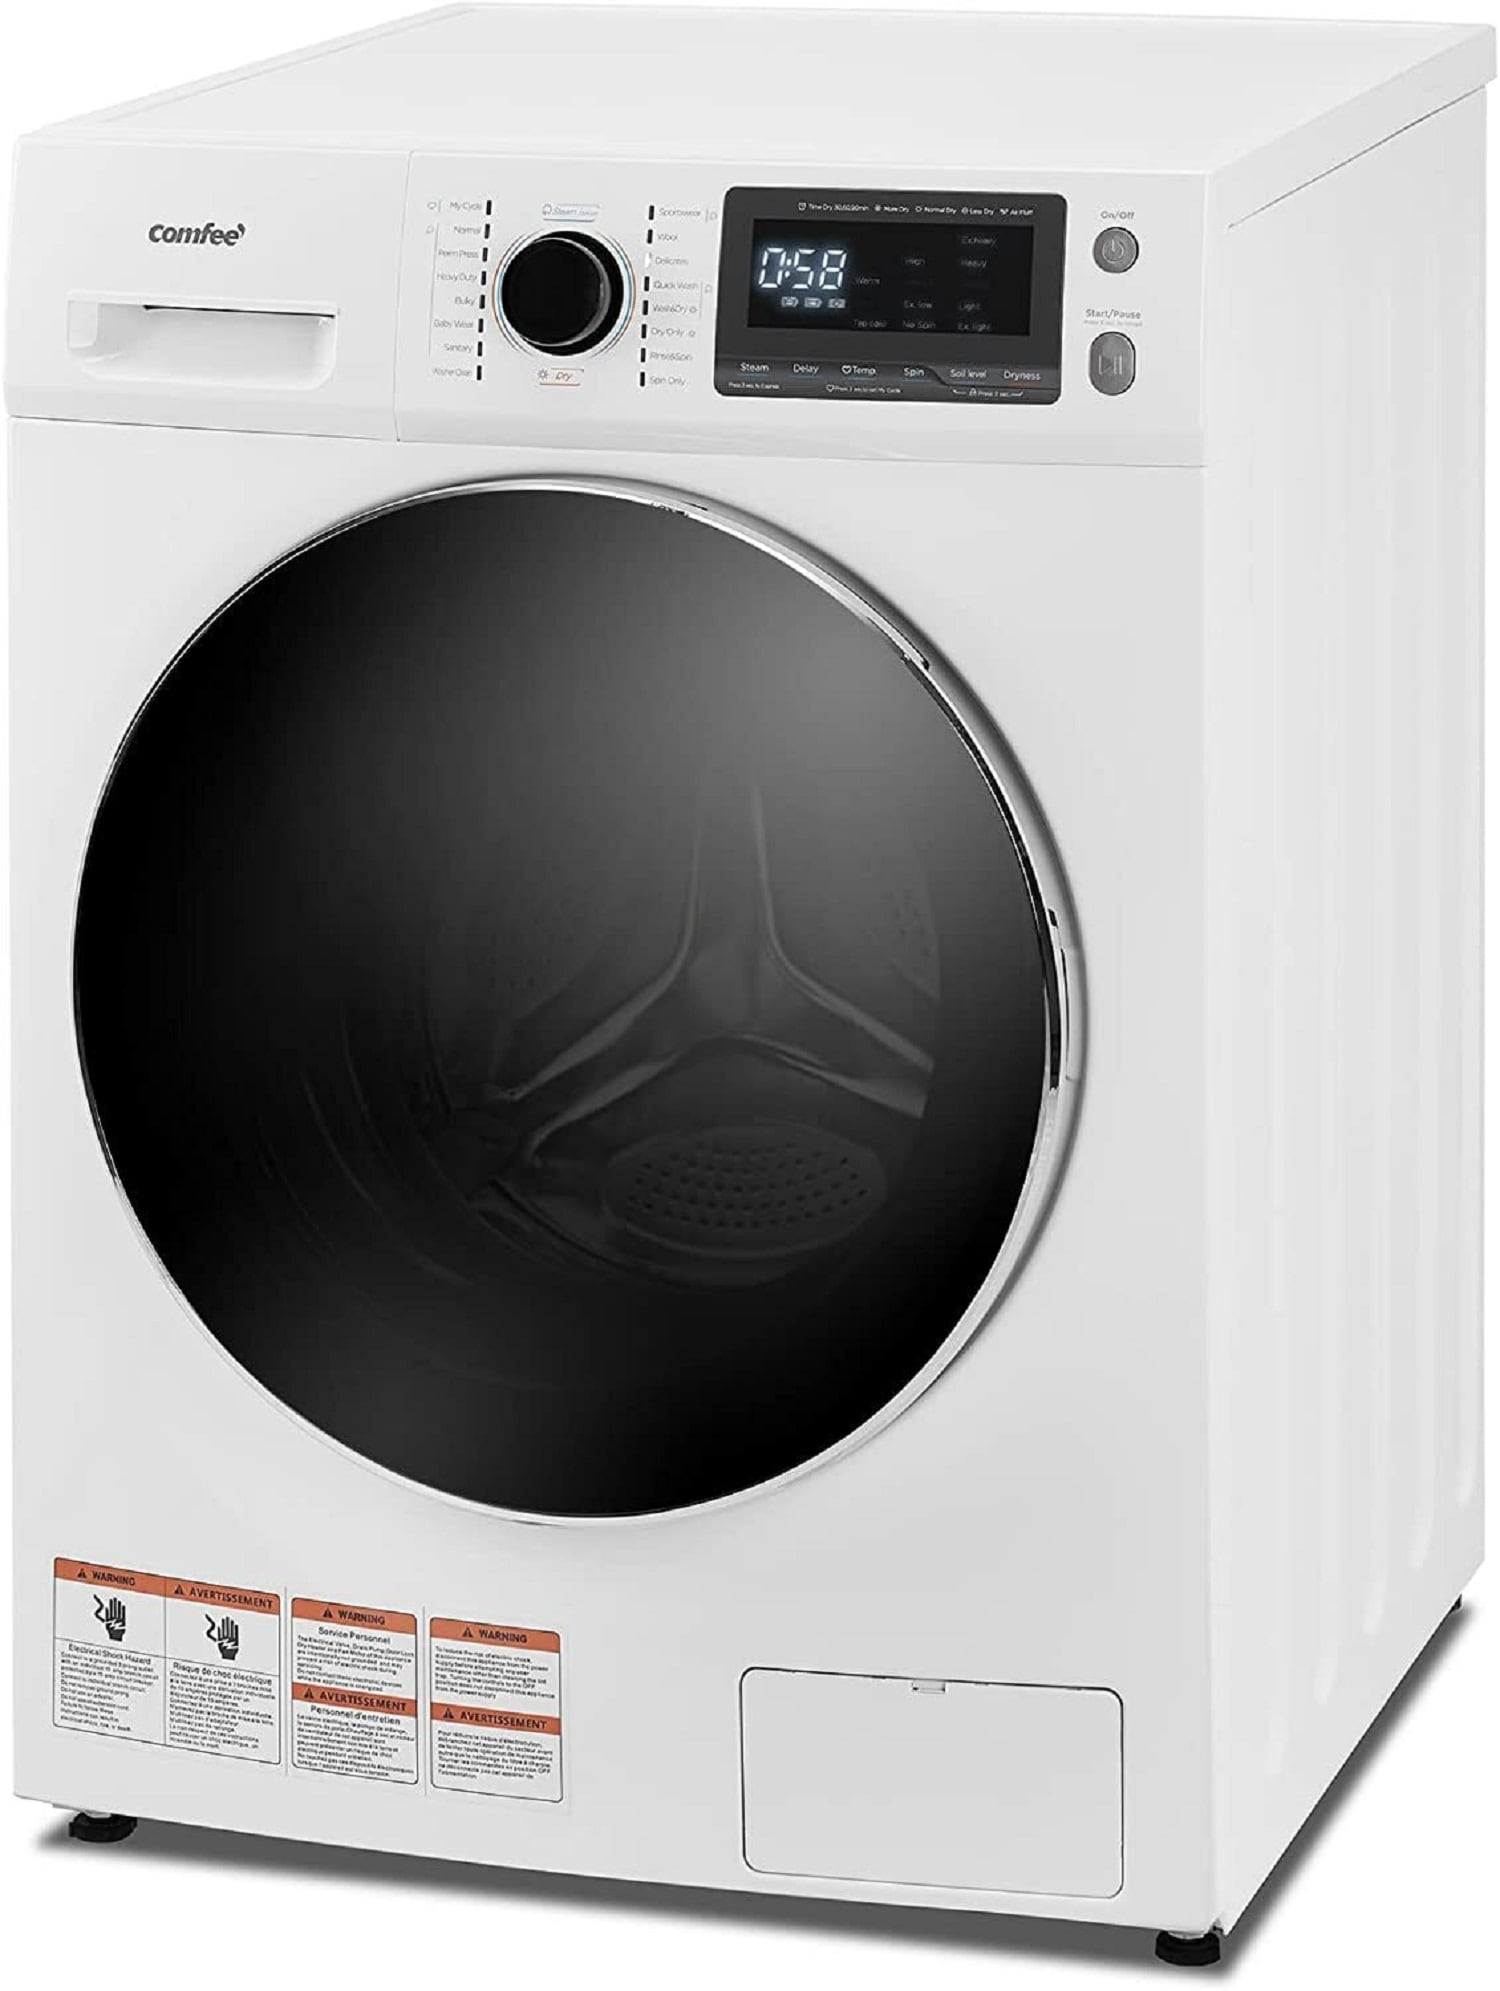 ENERGY STAR Certified Residential Clothes Dryers